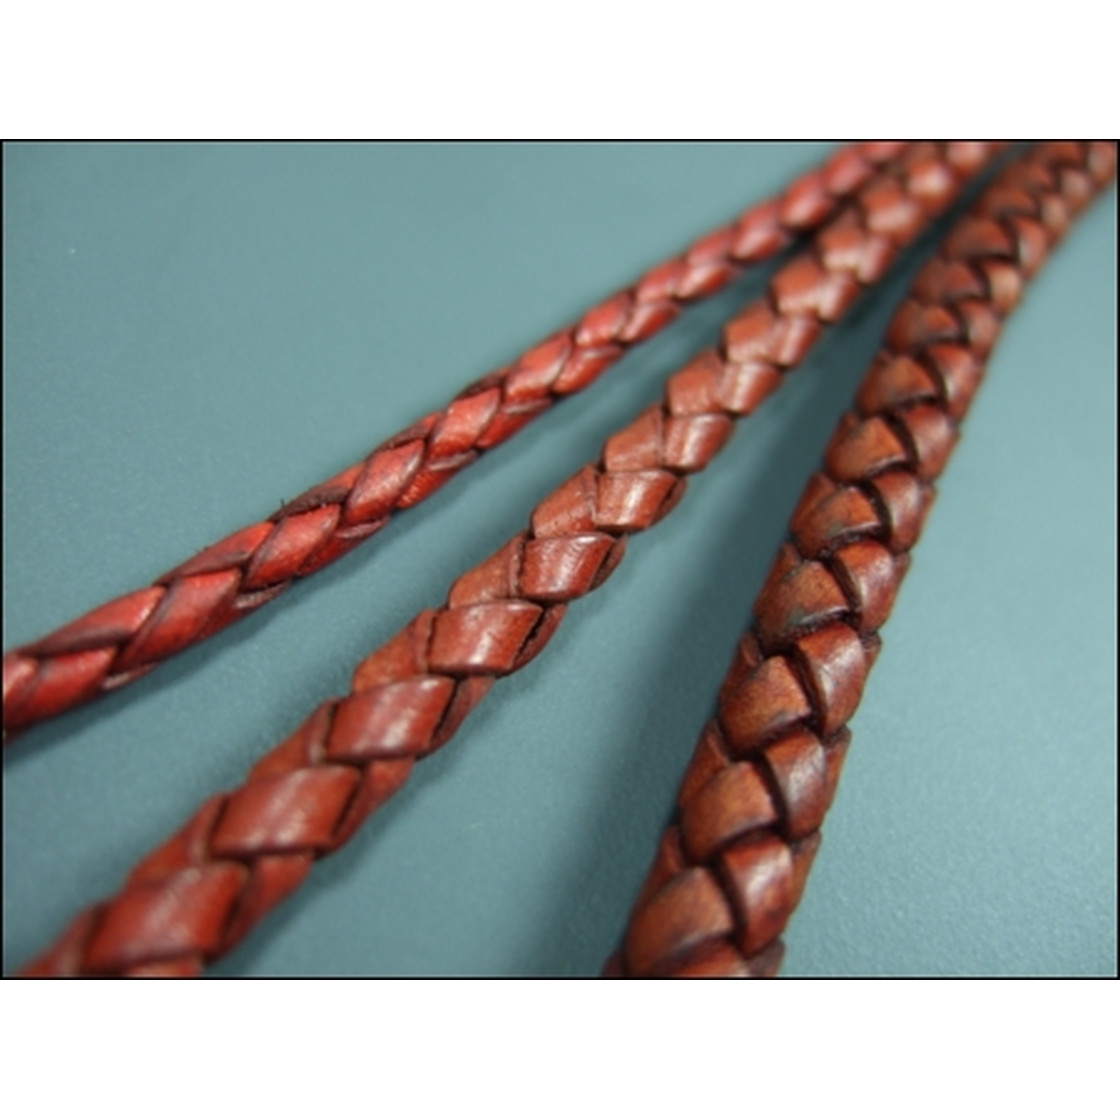 https://endlessleather.com/media/image/product/1207/lg/round-braided-leather-cord-r40mm-antique-red-brown.jpg